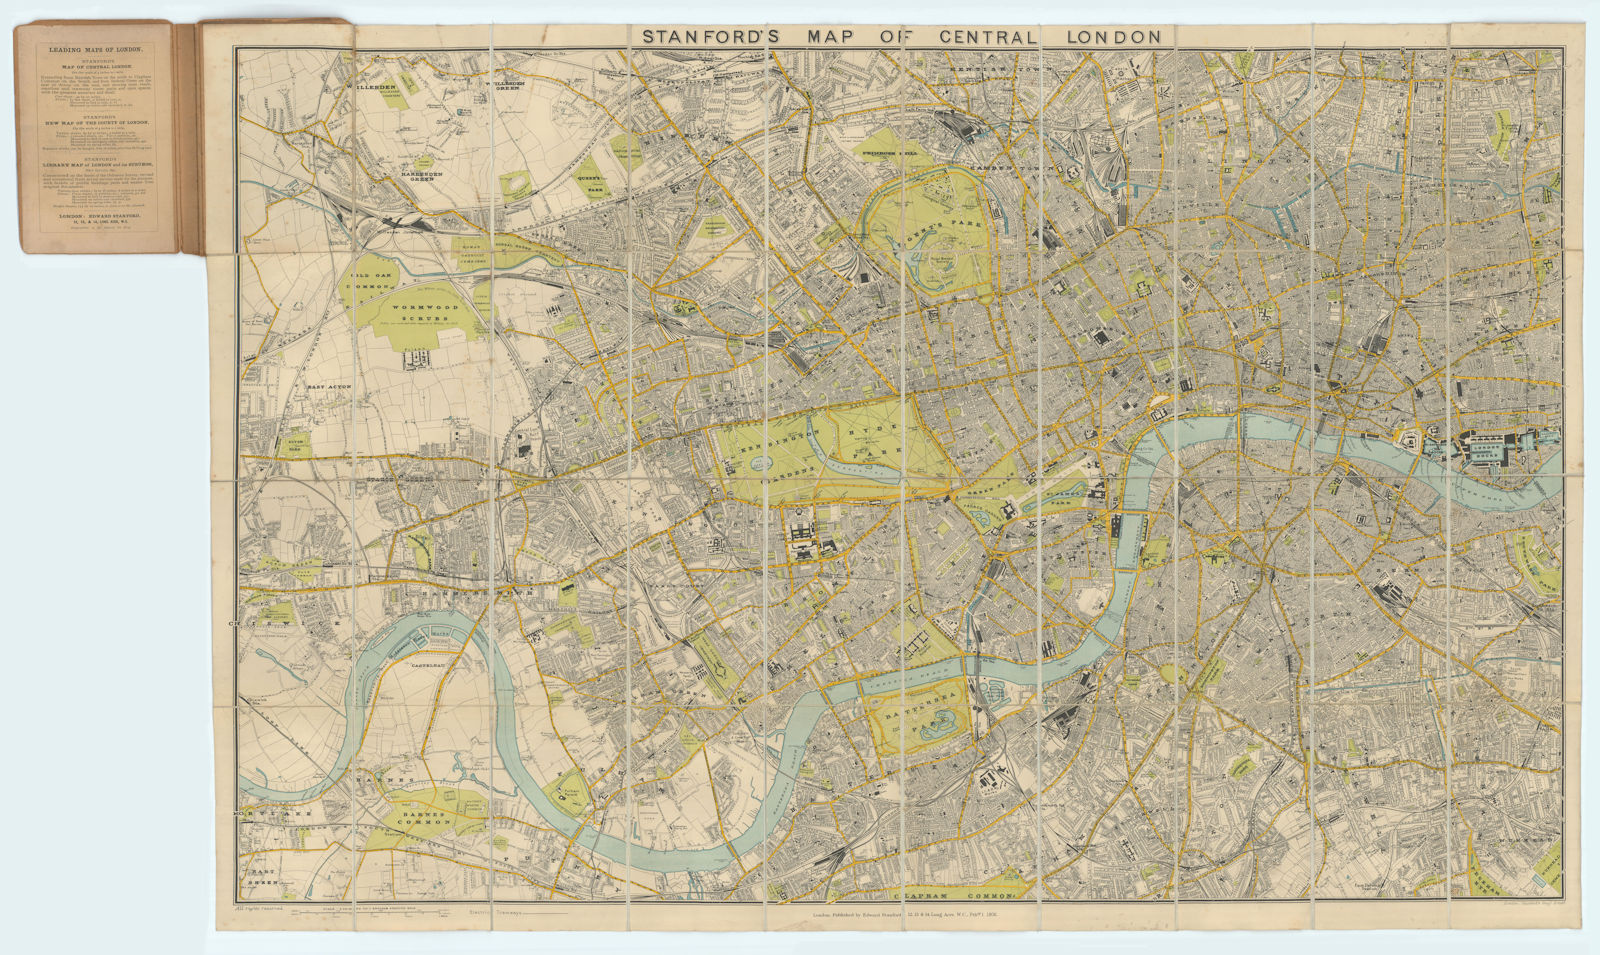 Associate Product Stanford's Map of Central London. Folding, linen-backed antique city plan 1905